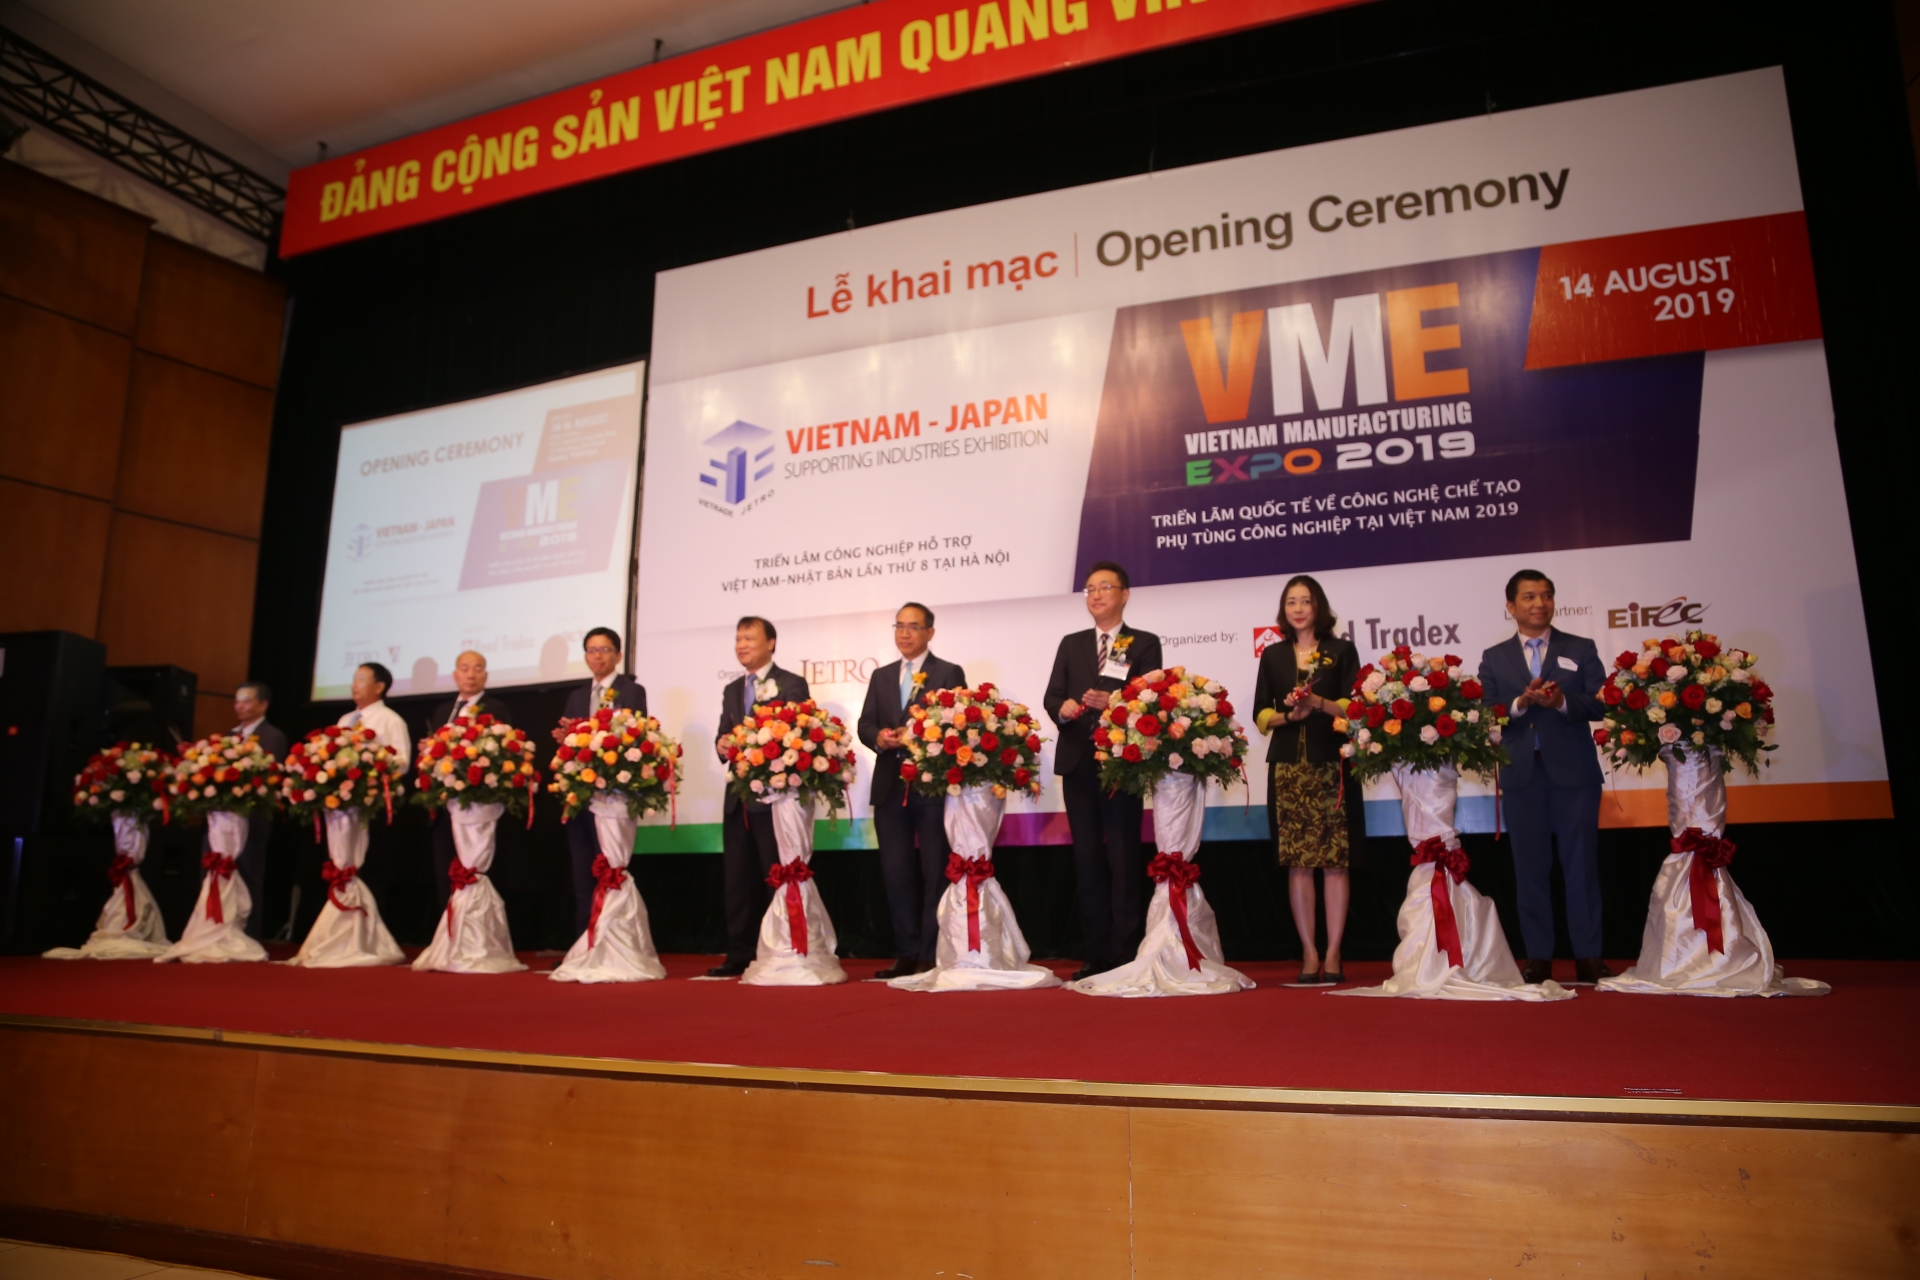 International exhibitions on supporting industry open in Hanoi